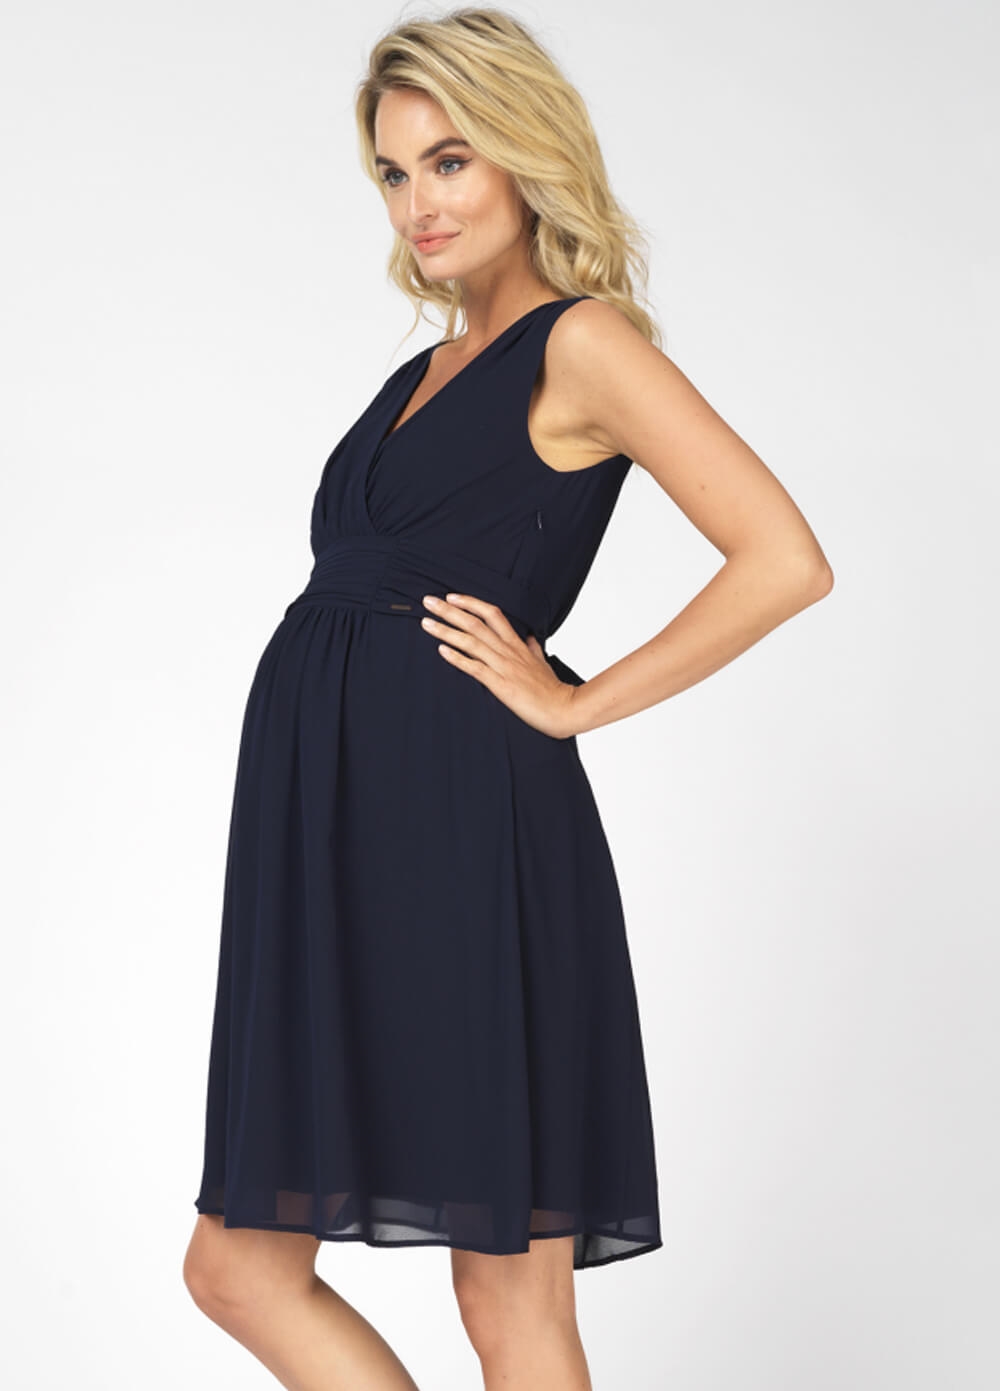 Queen Bee Liane Maternity Cocktail Dress in Dark Blue by Noppies